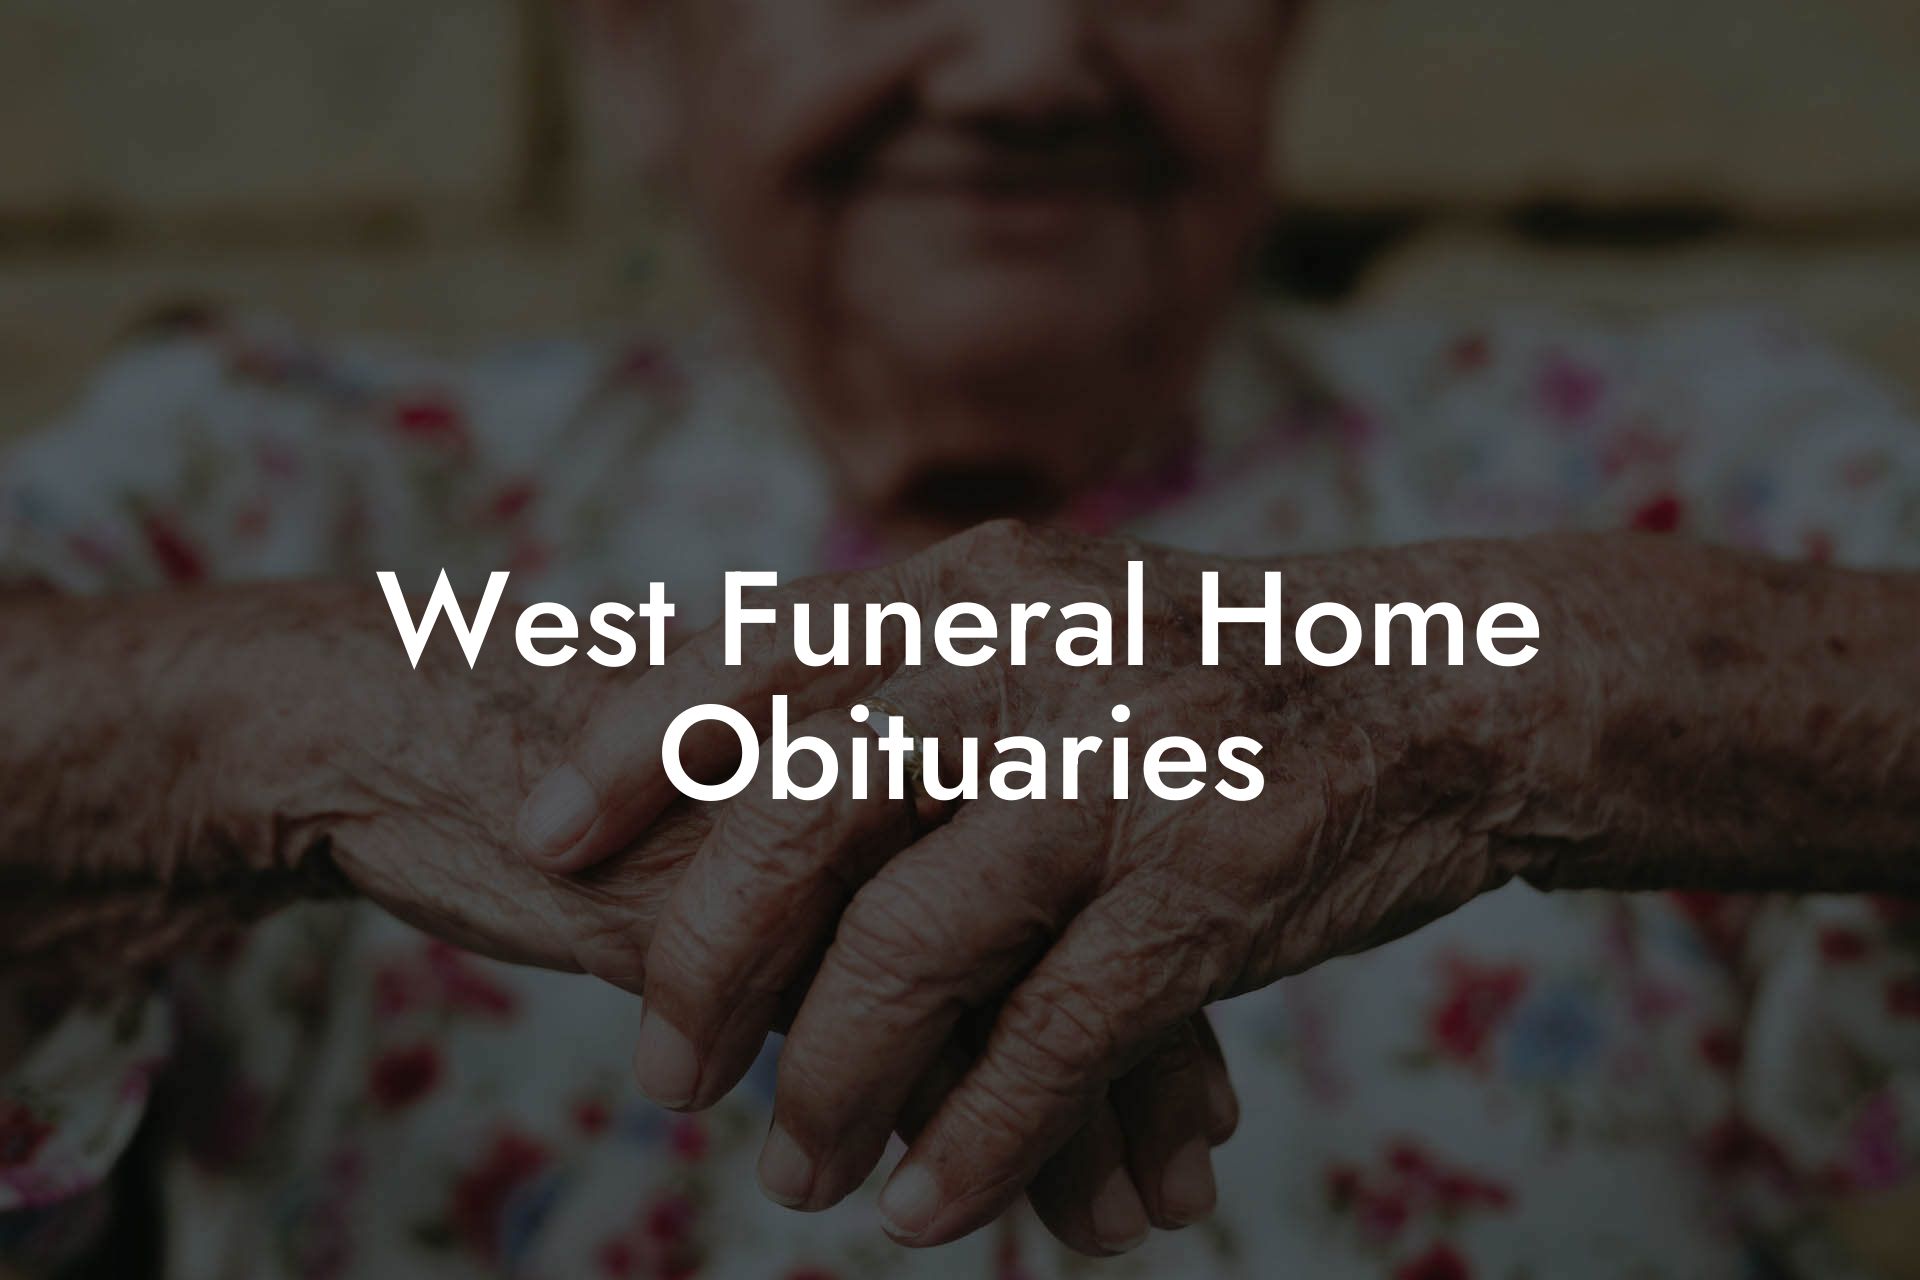 West Funeral Home Obituaries